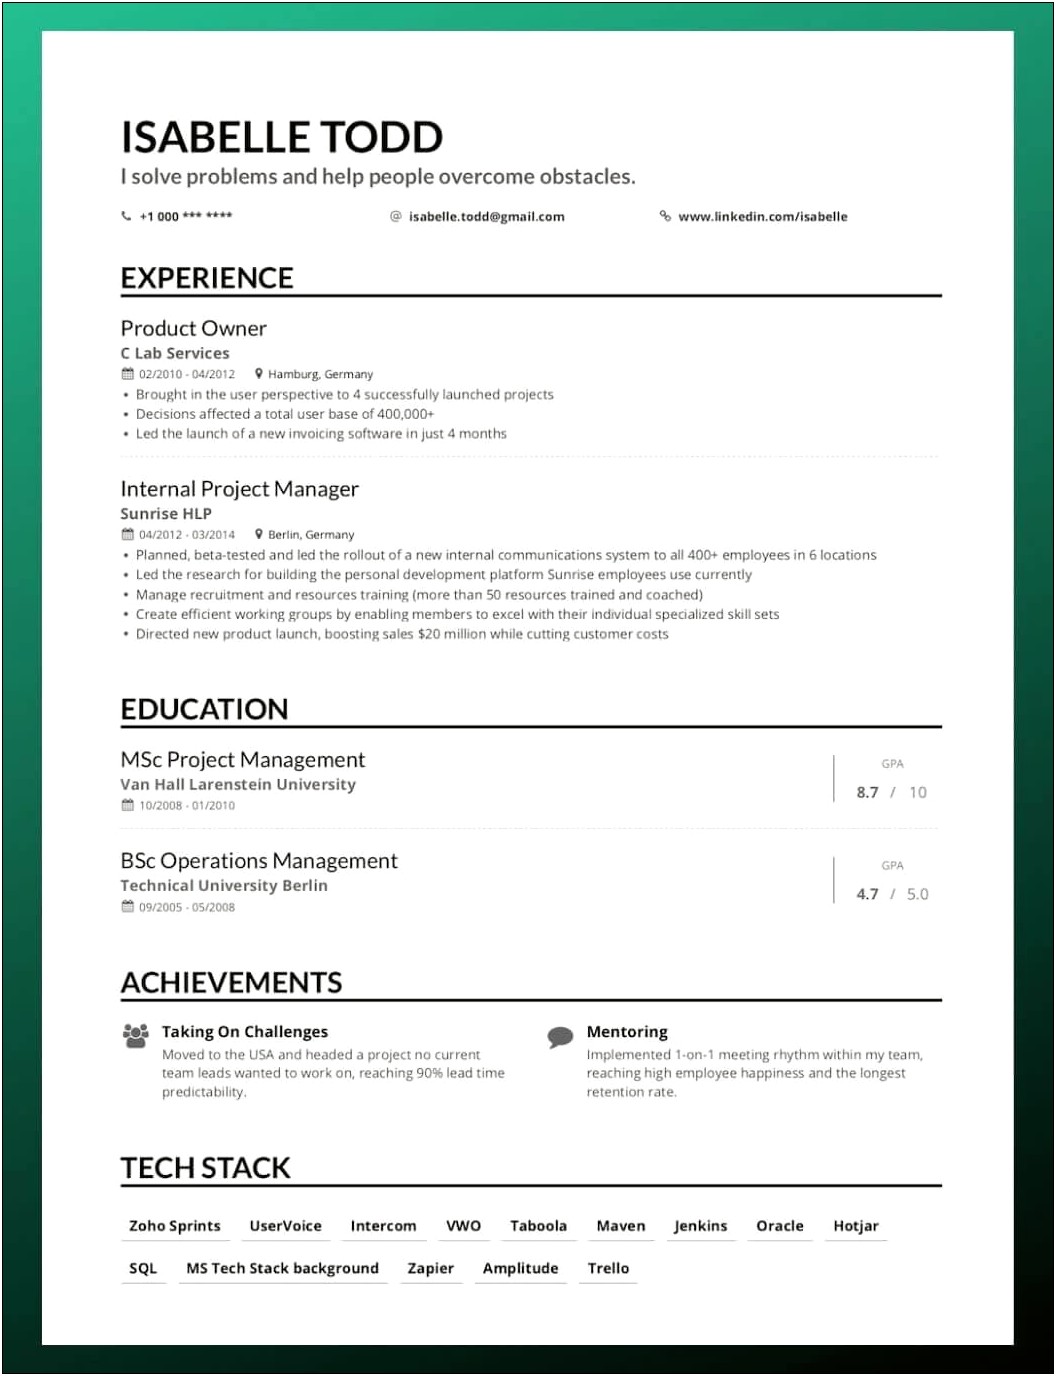 Do You Put References In Resumes